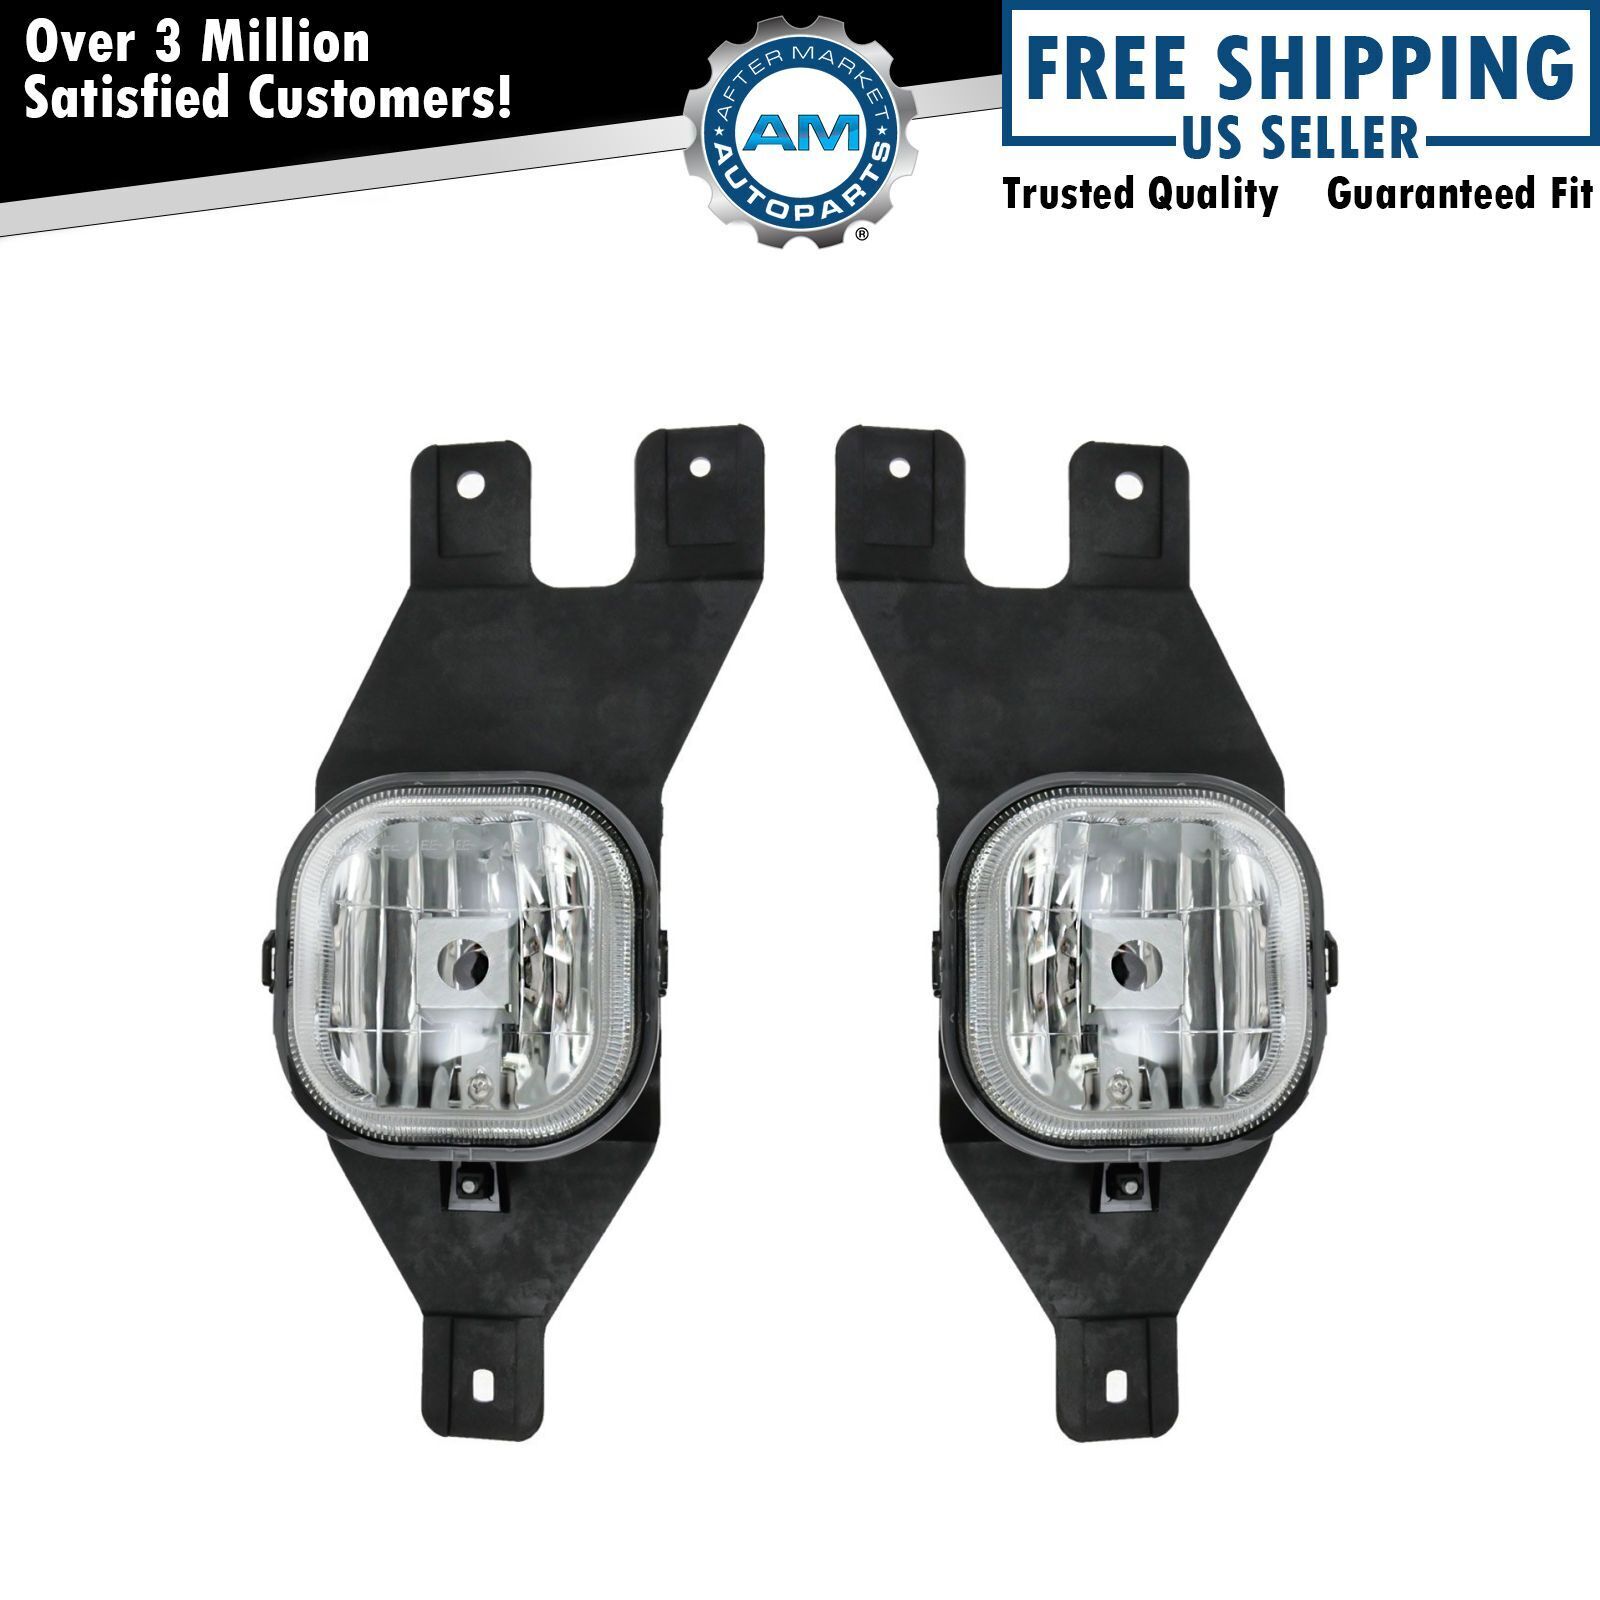 Fog Driving Lights Lamps Pair Set for Ford F-Series Super Duty Pickup Truck